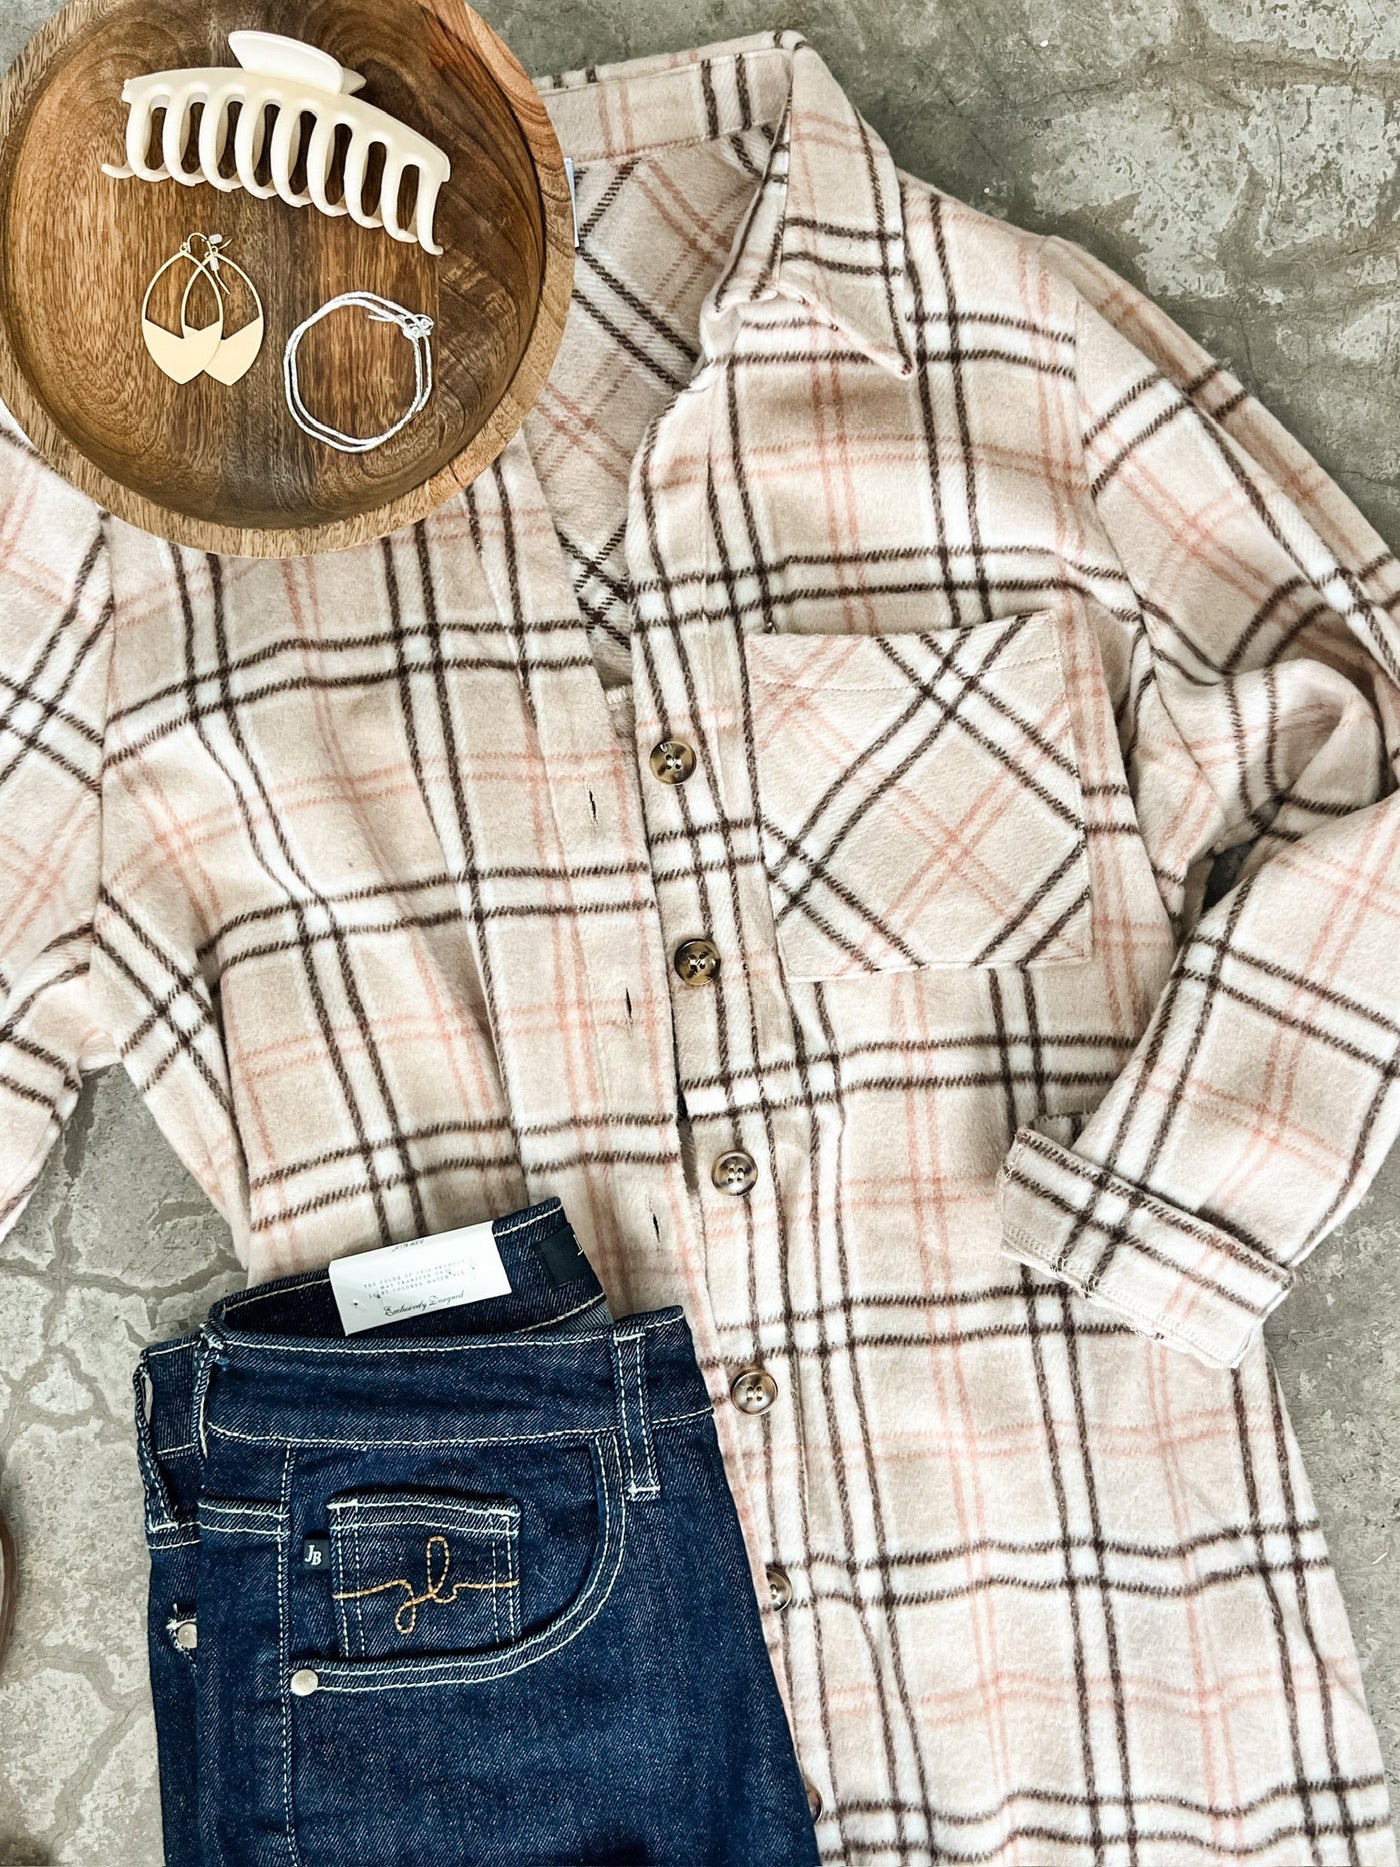 Plaid Button Up Tunic In Beige & Pink